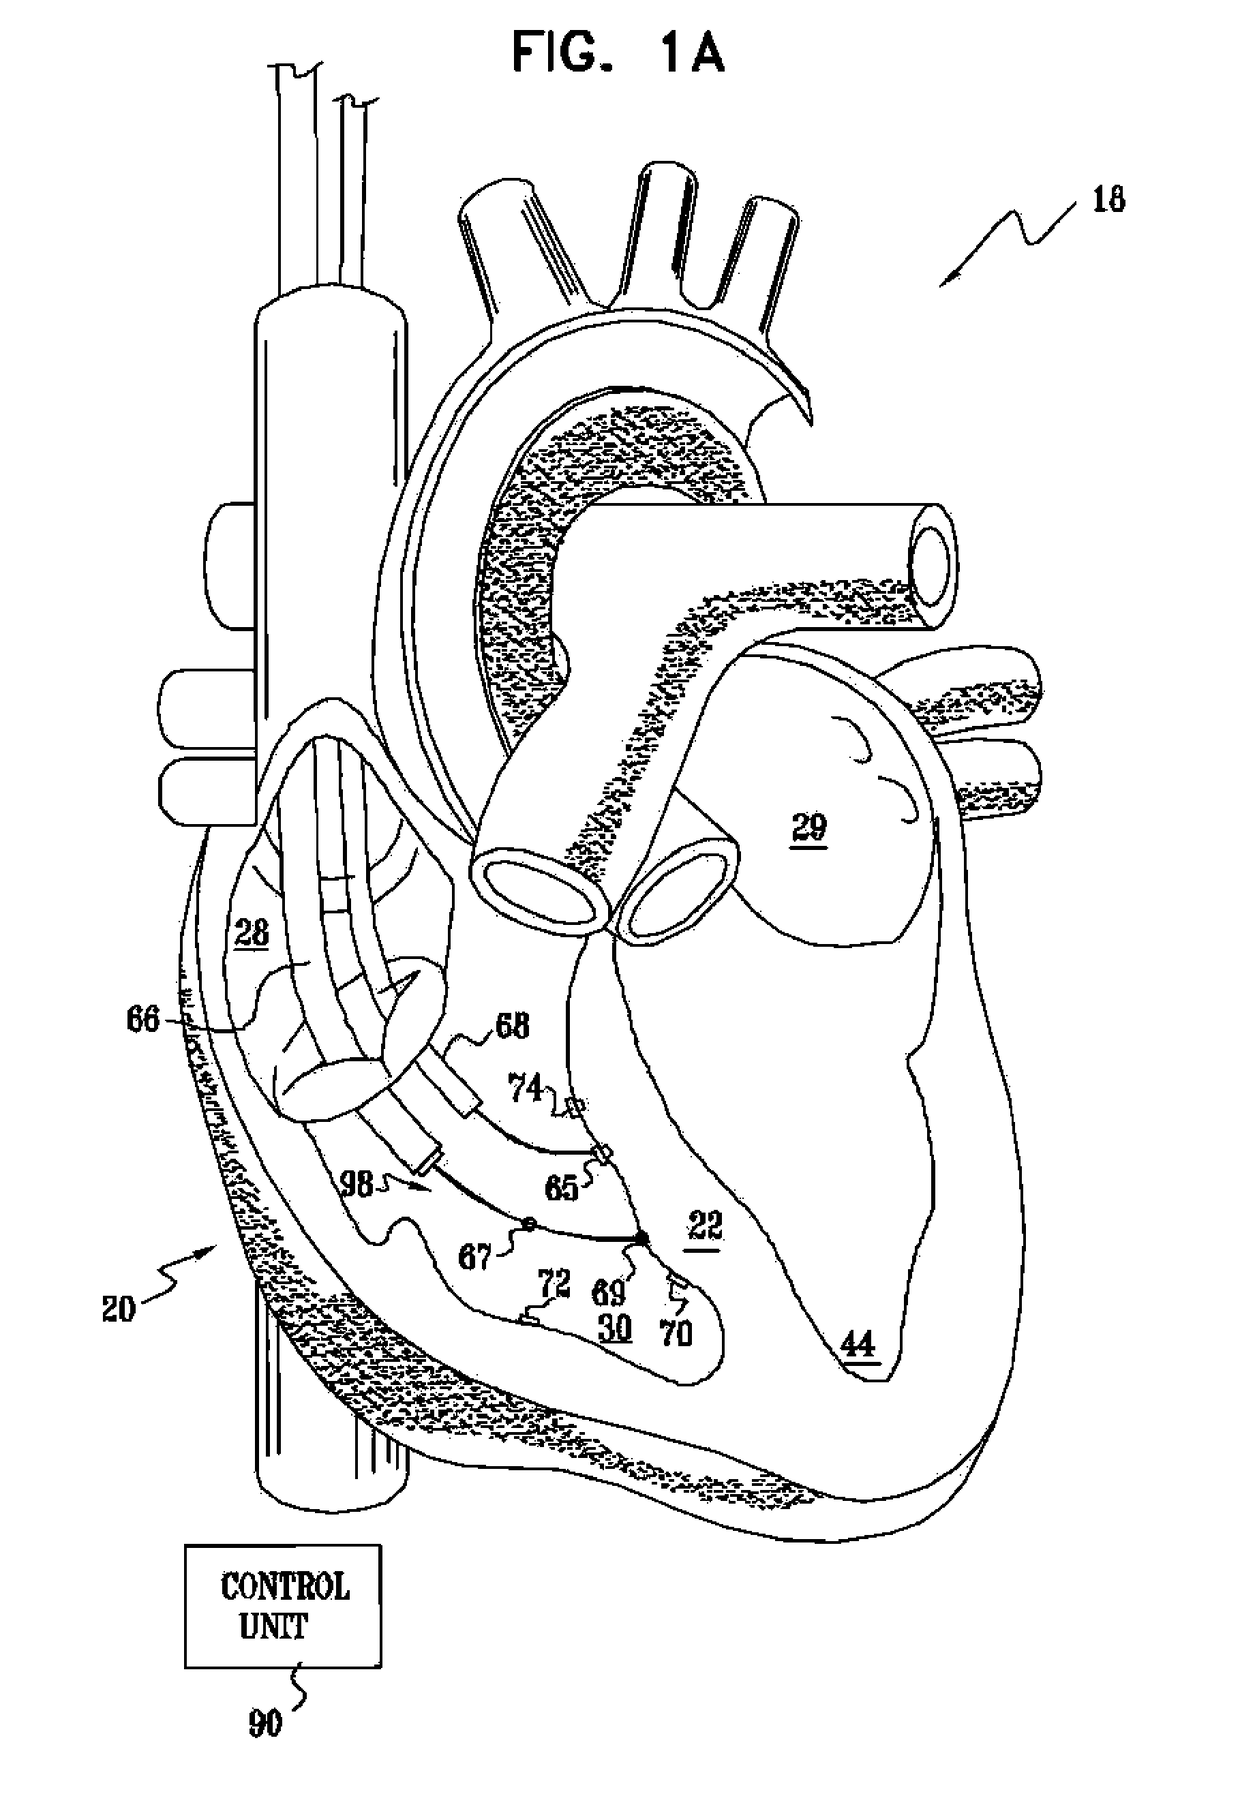 Signal delivery through the right ventricular septum